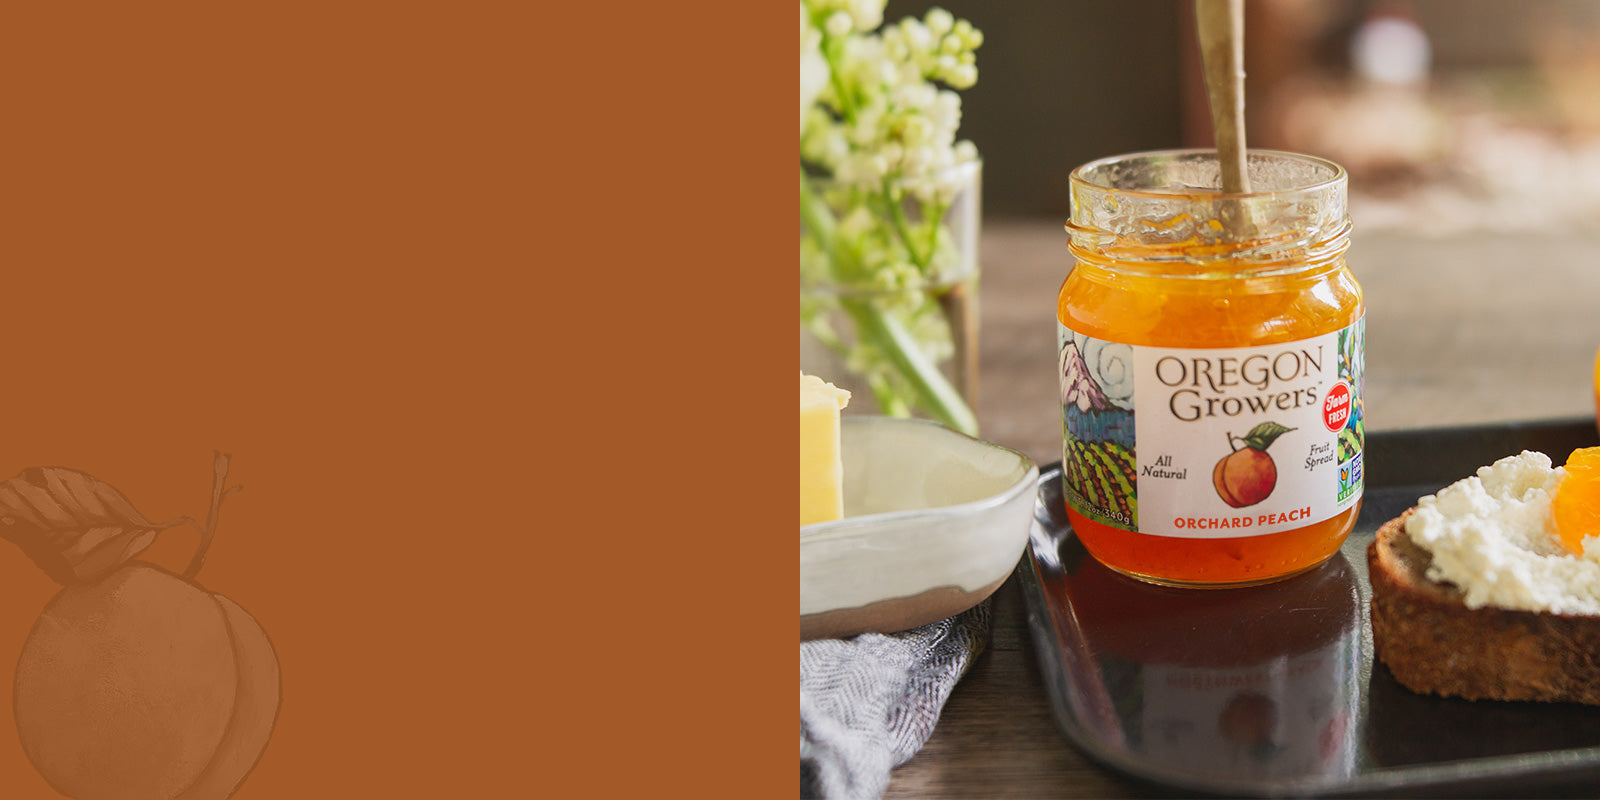 A split image showing a peach watermark on a peachy background on the left side and a jar of Oregon Grower's Orchard peach jam next to toast and butter on a breakfast table on the right side.